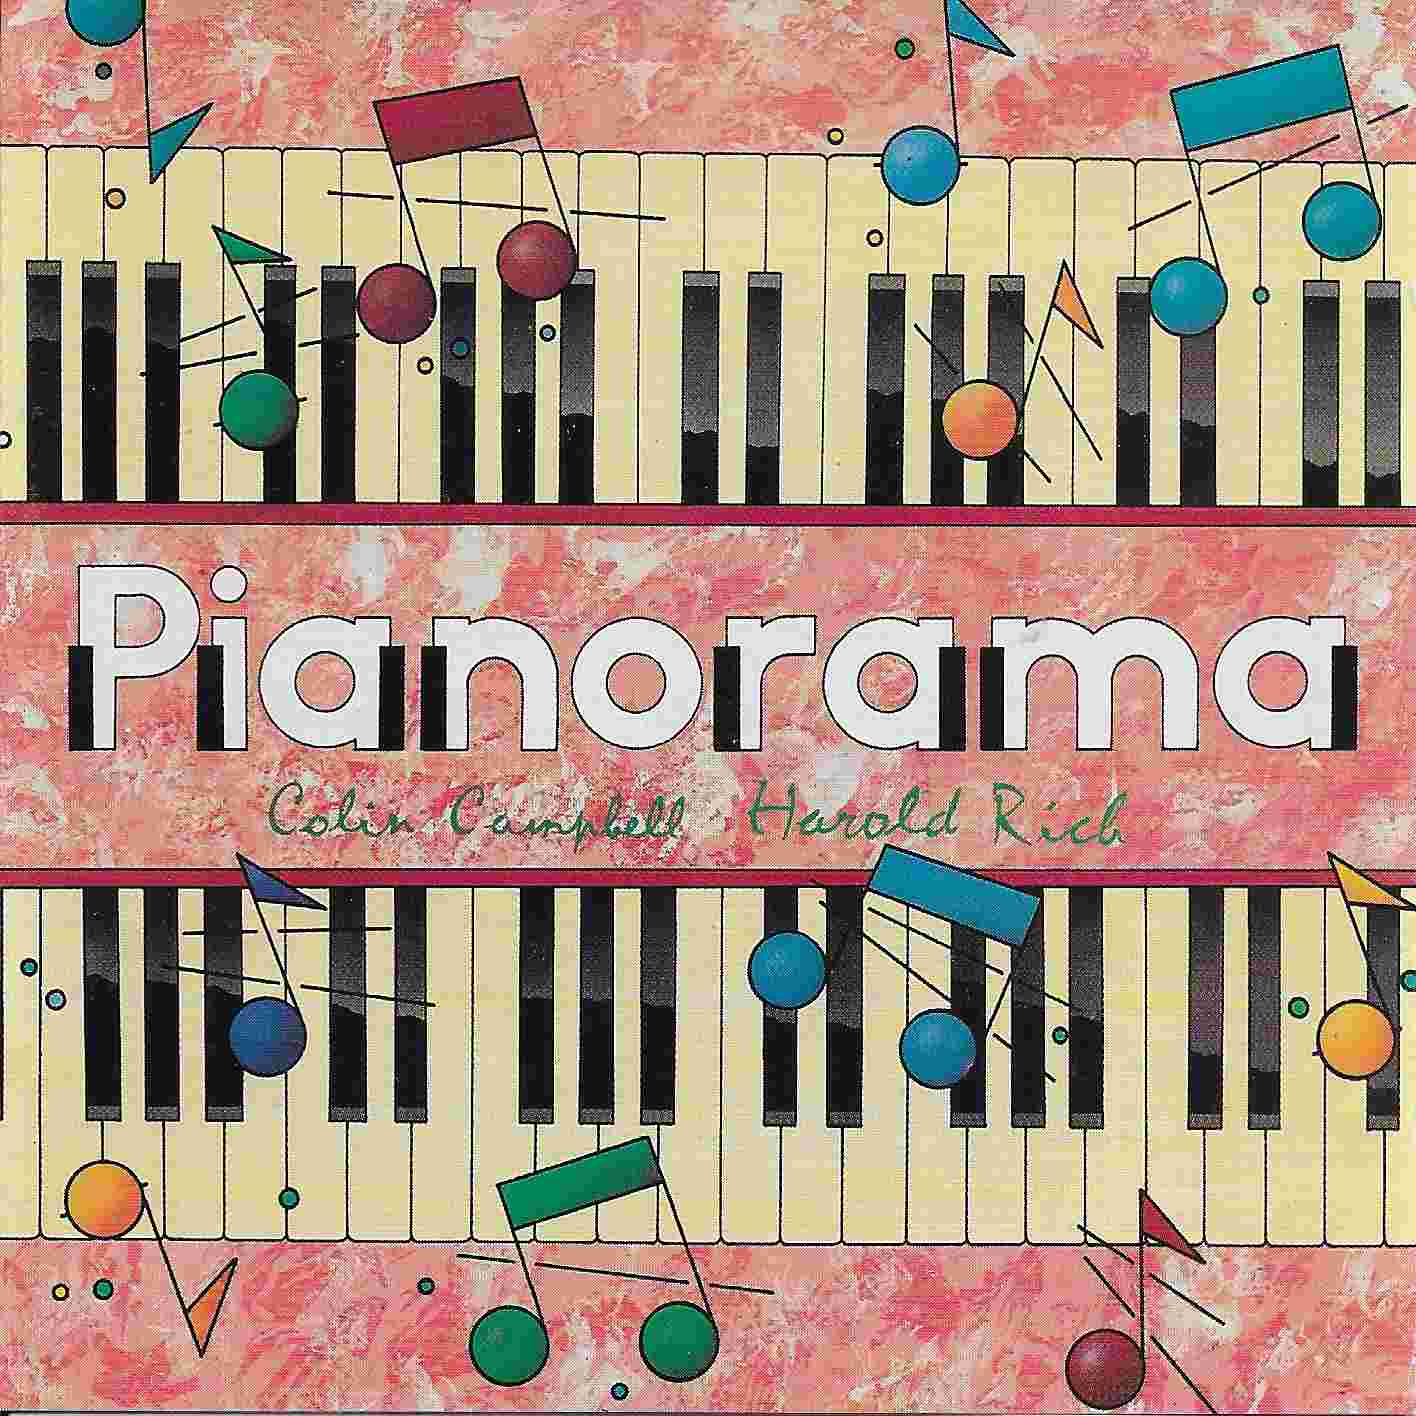 Picture of Pianorama by artist Harold Rich / Colin Campbell from the BBC cds - Records and Tapes library